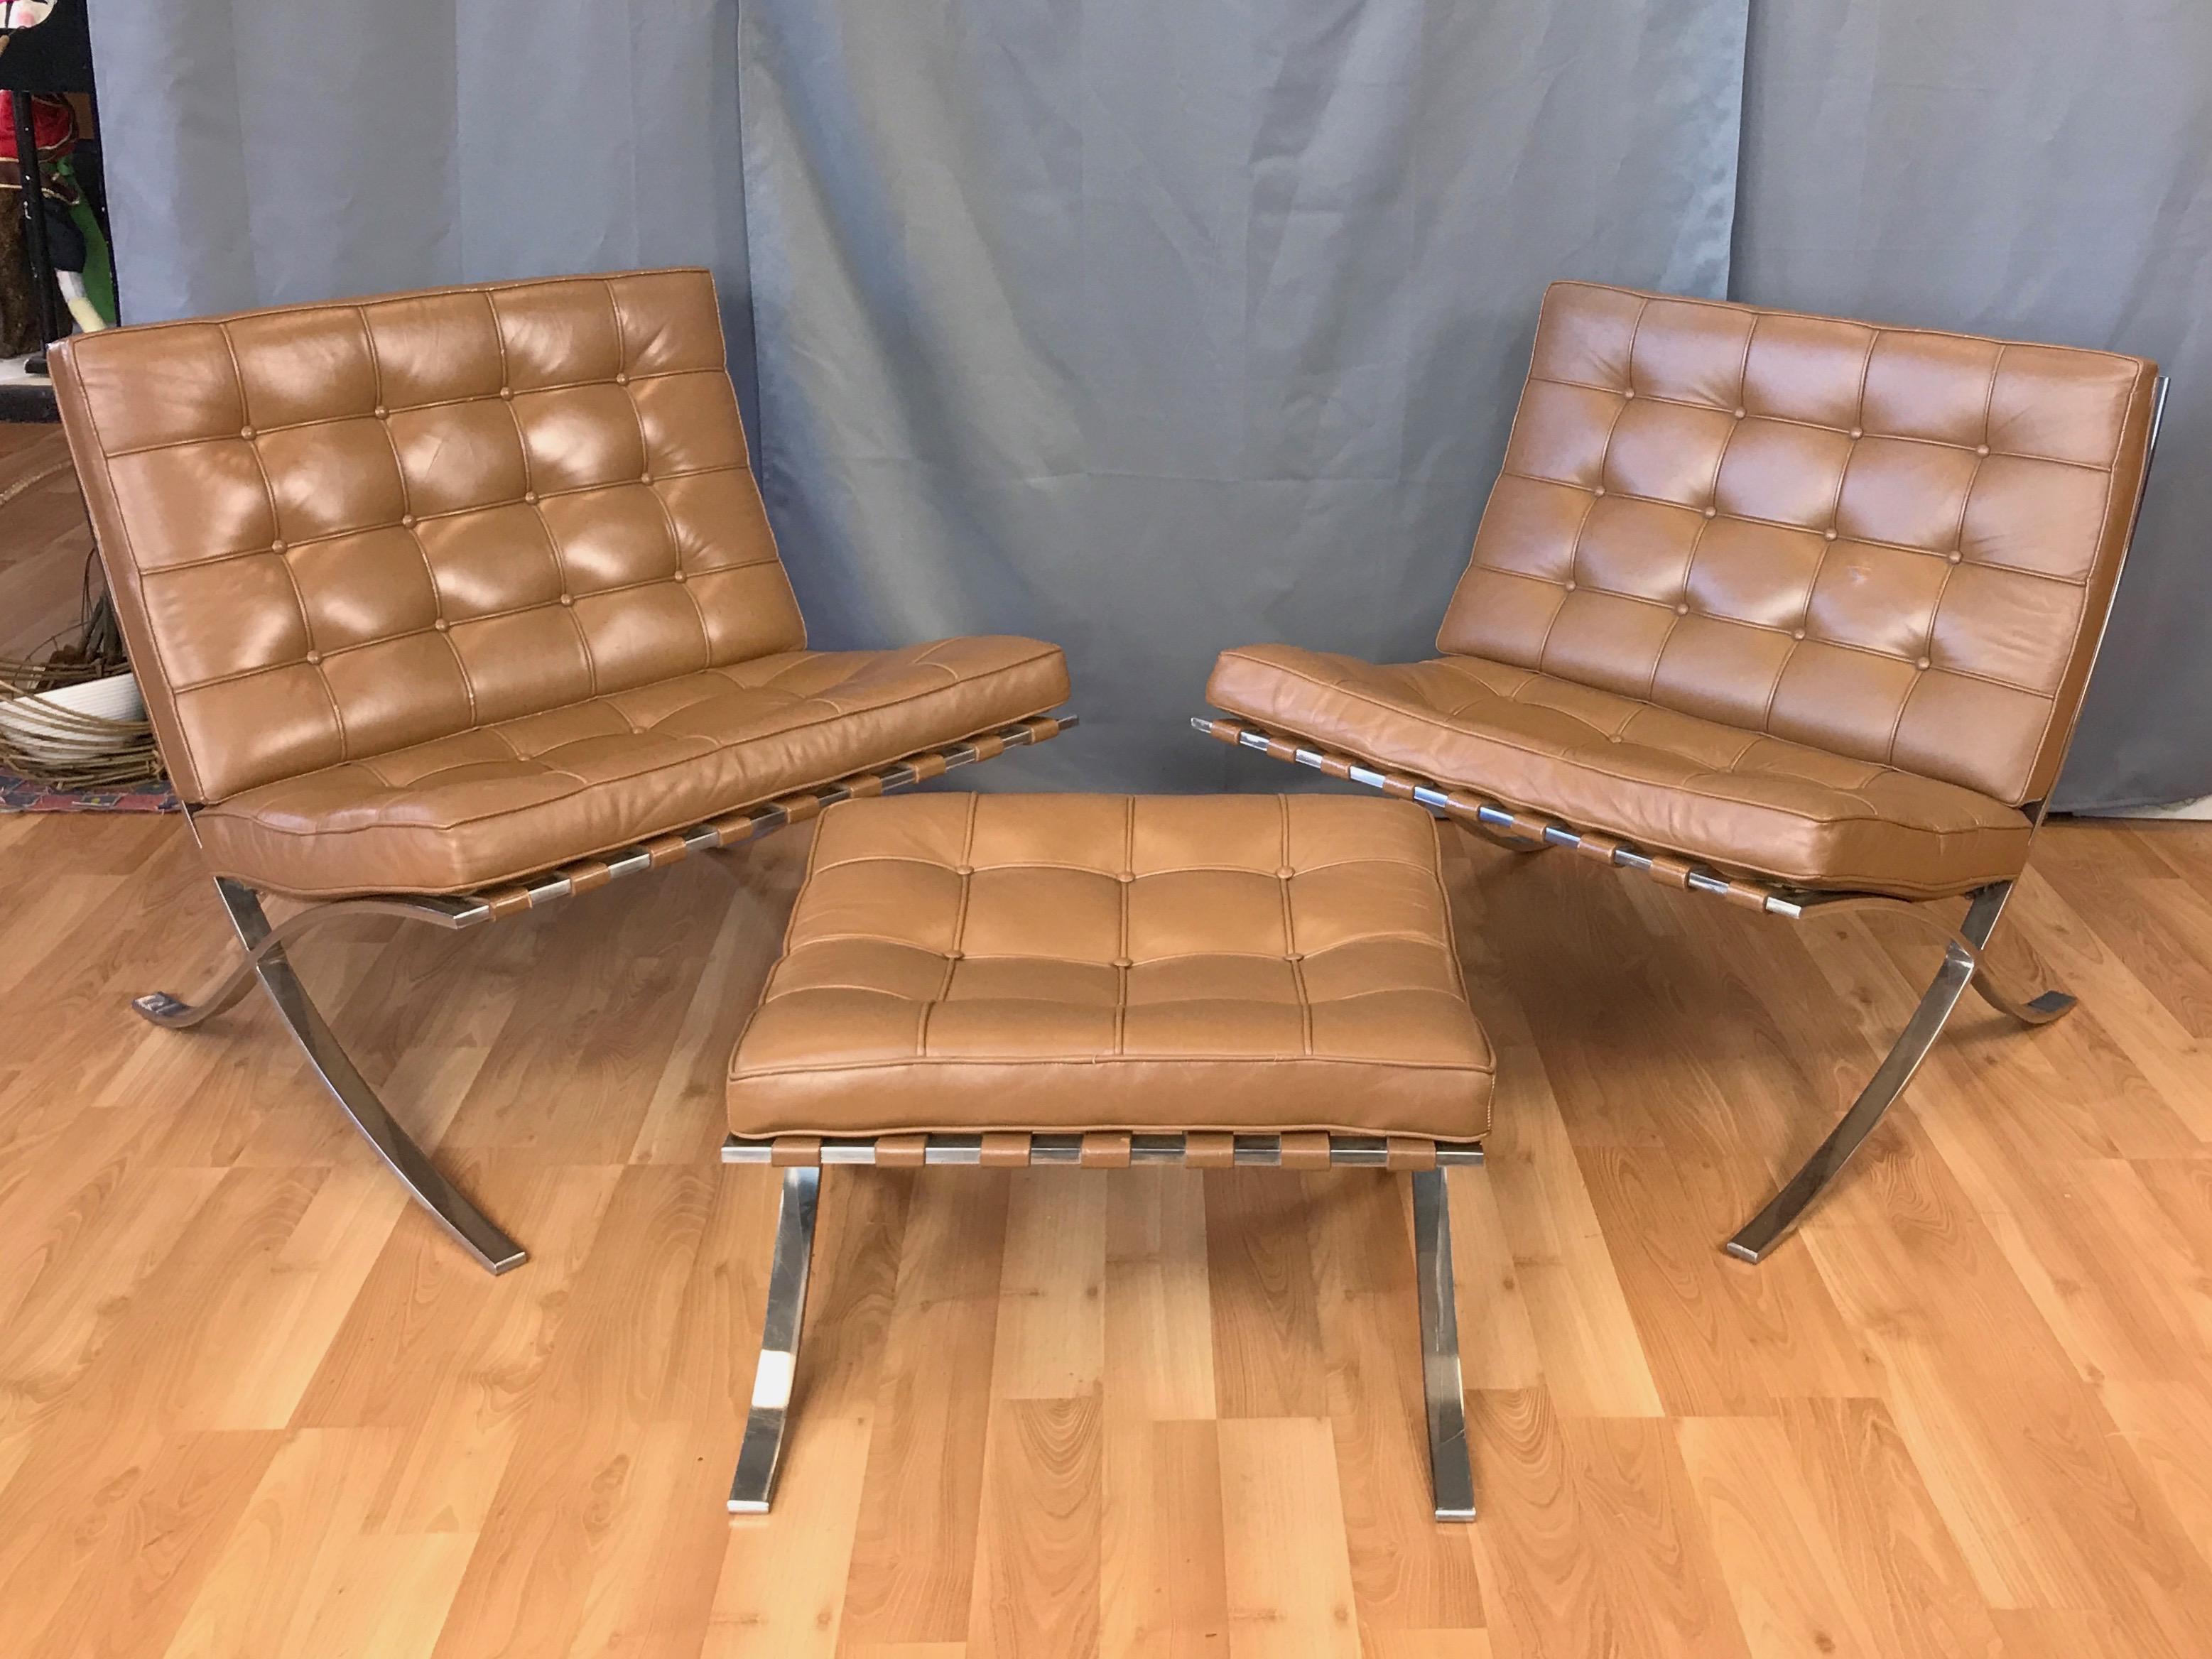 An early 1970s three-piece Barcelona chair and ottoman set designed by Mies van der Rohe and Lilly Reich, and produced by Knoll International.

Originally created to serve as seating for the king and queen of Spain in the German Pavilion at the